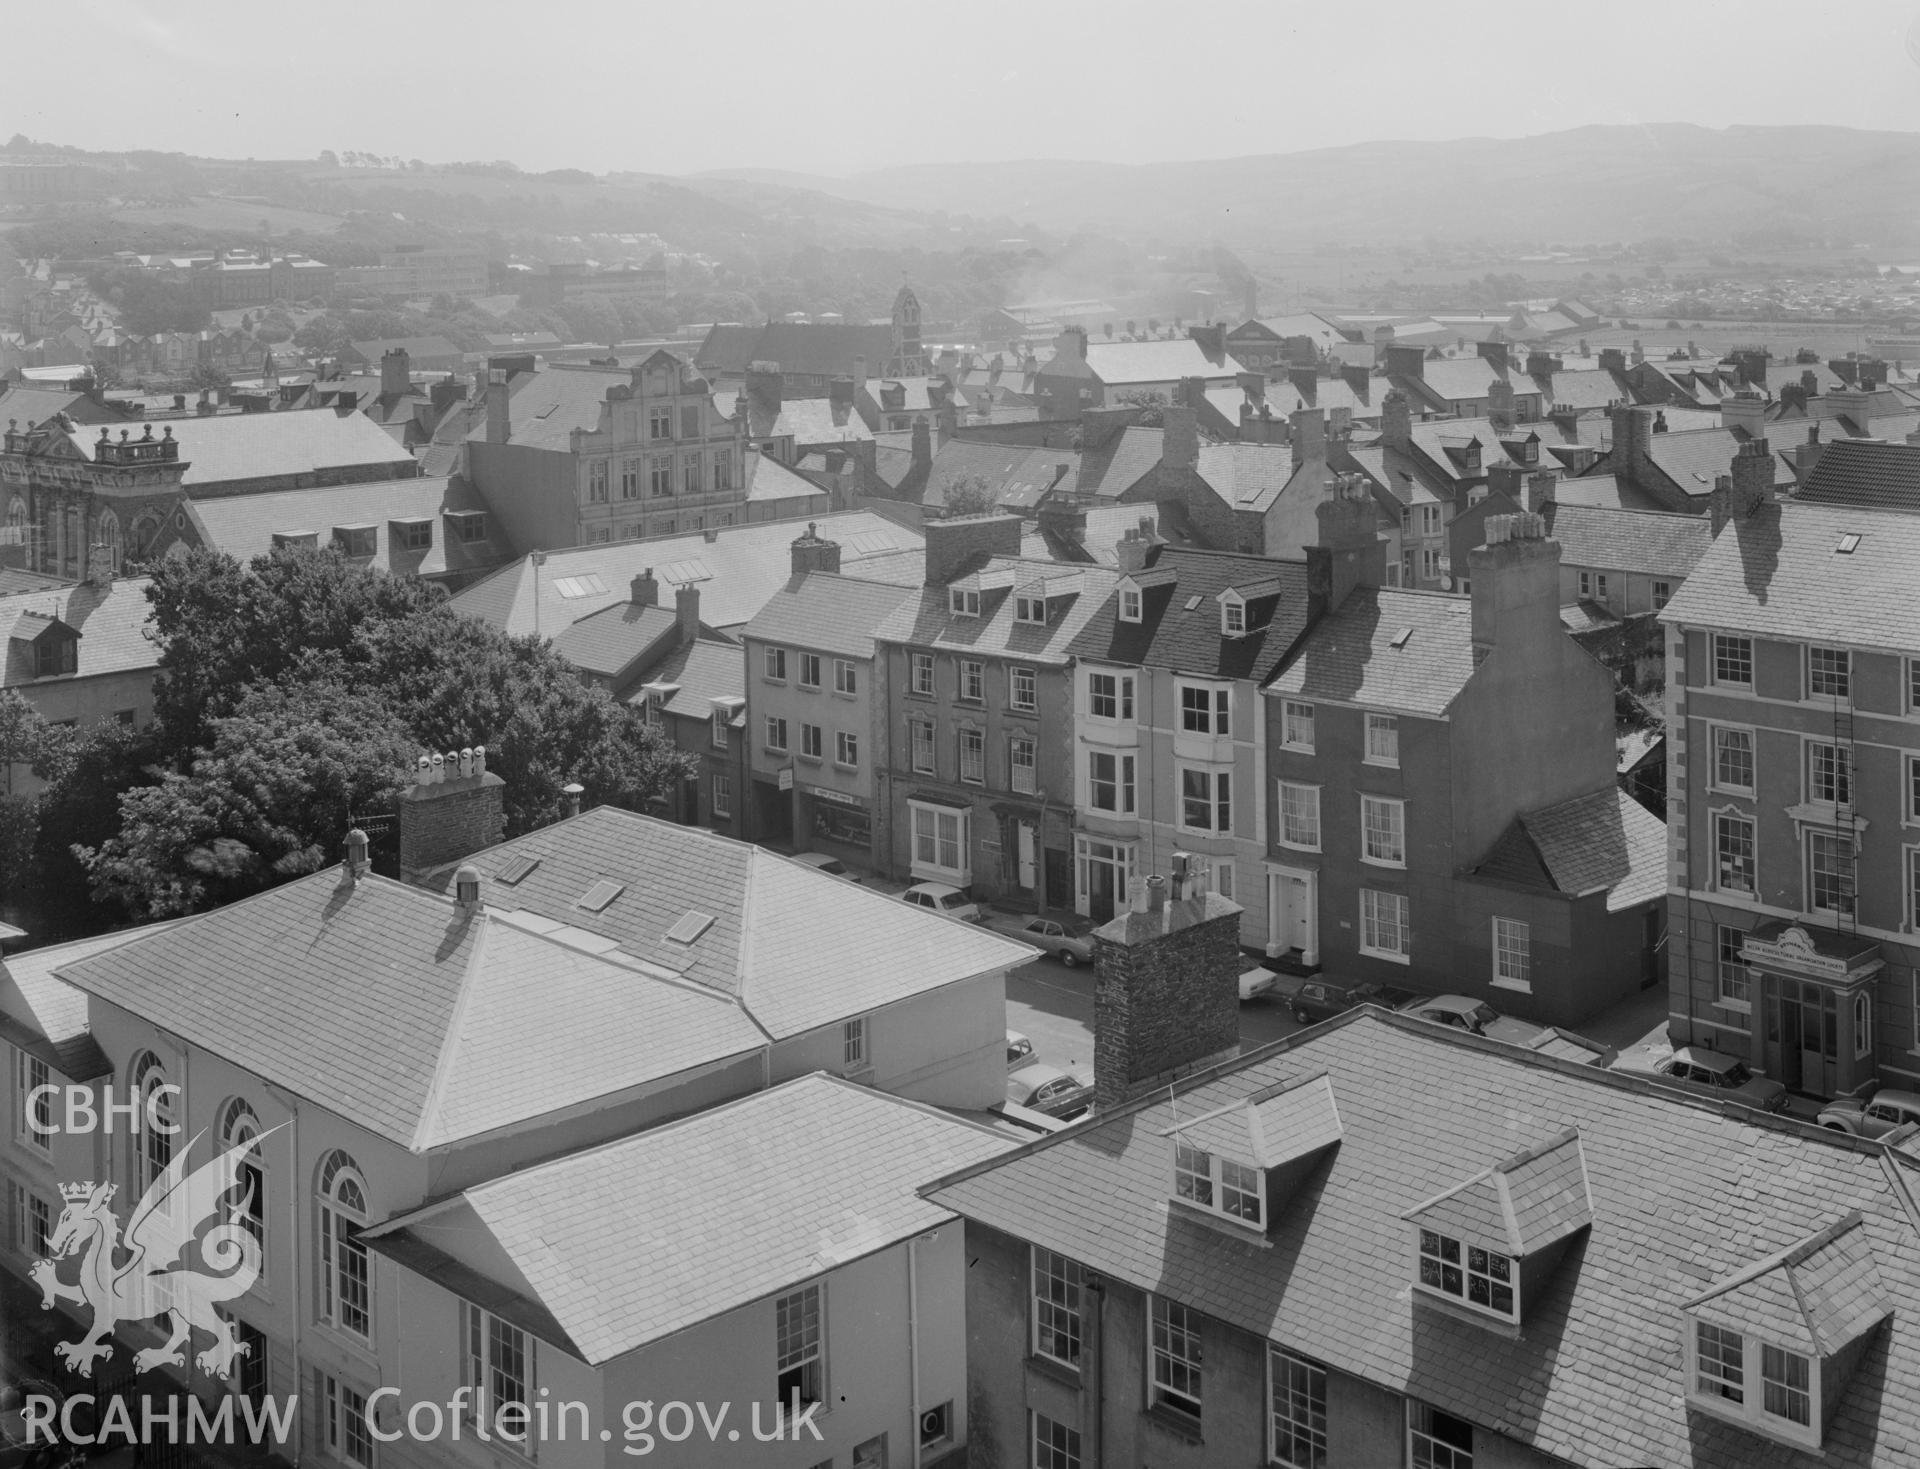 Black and white acetate negative showing view of Aberystwyth from an elevated position.